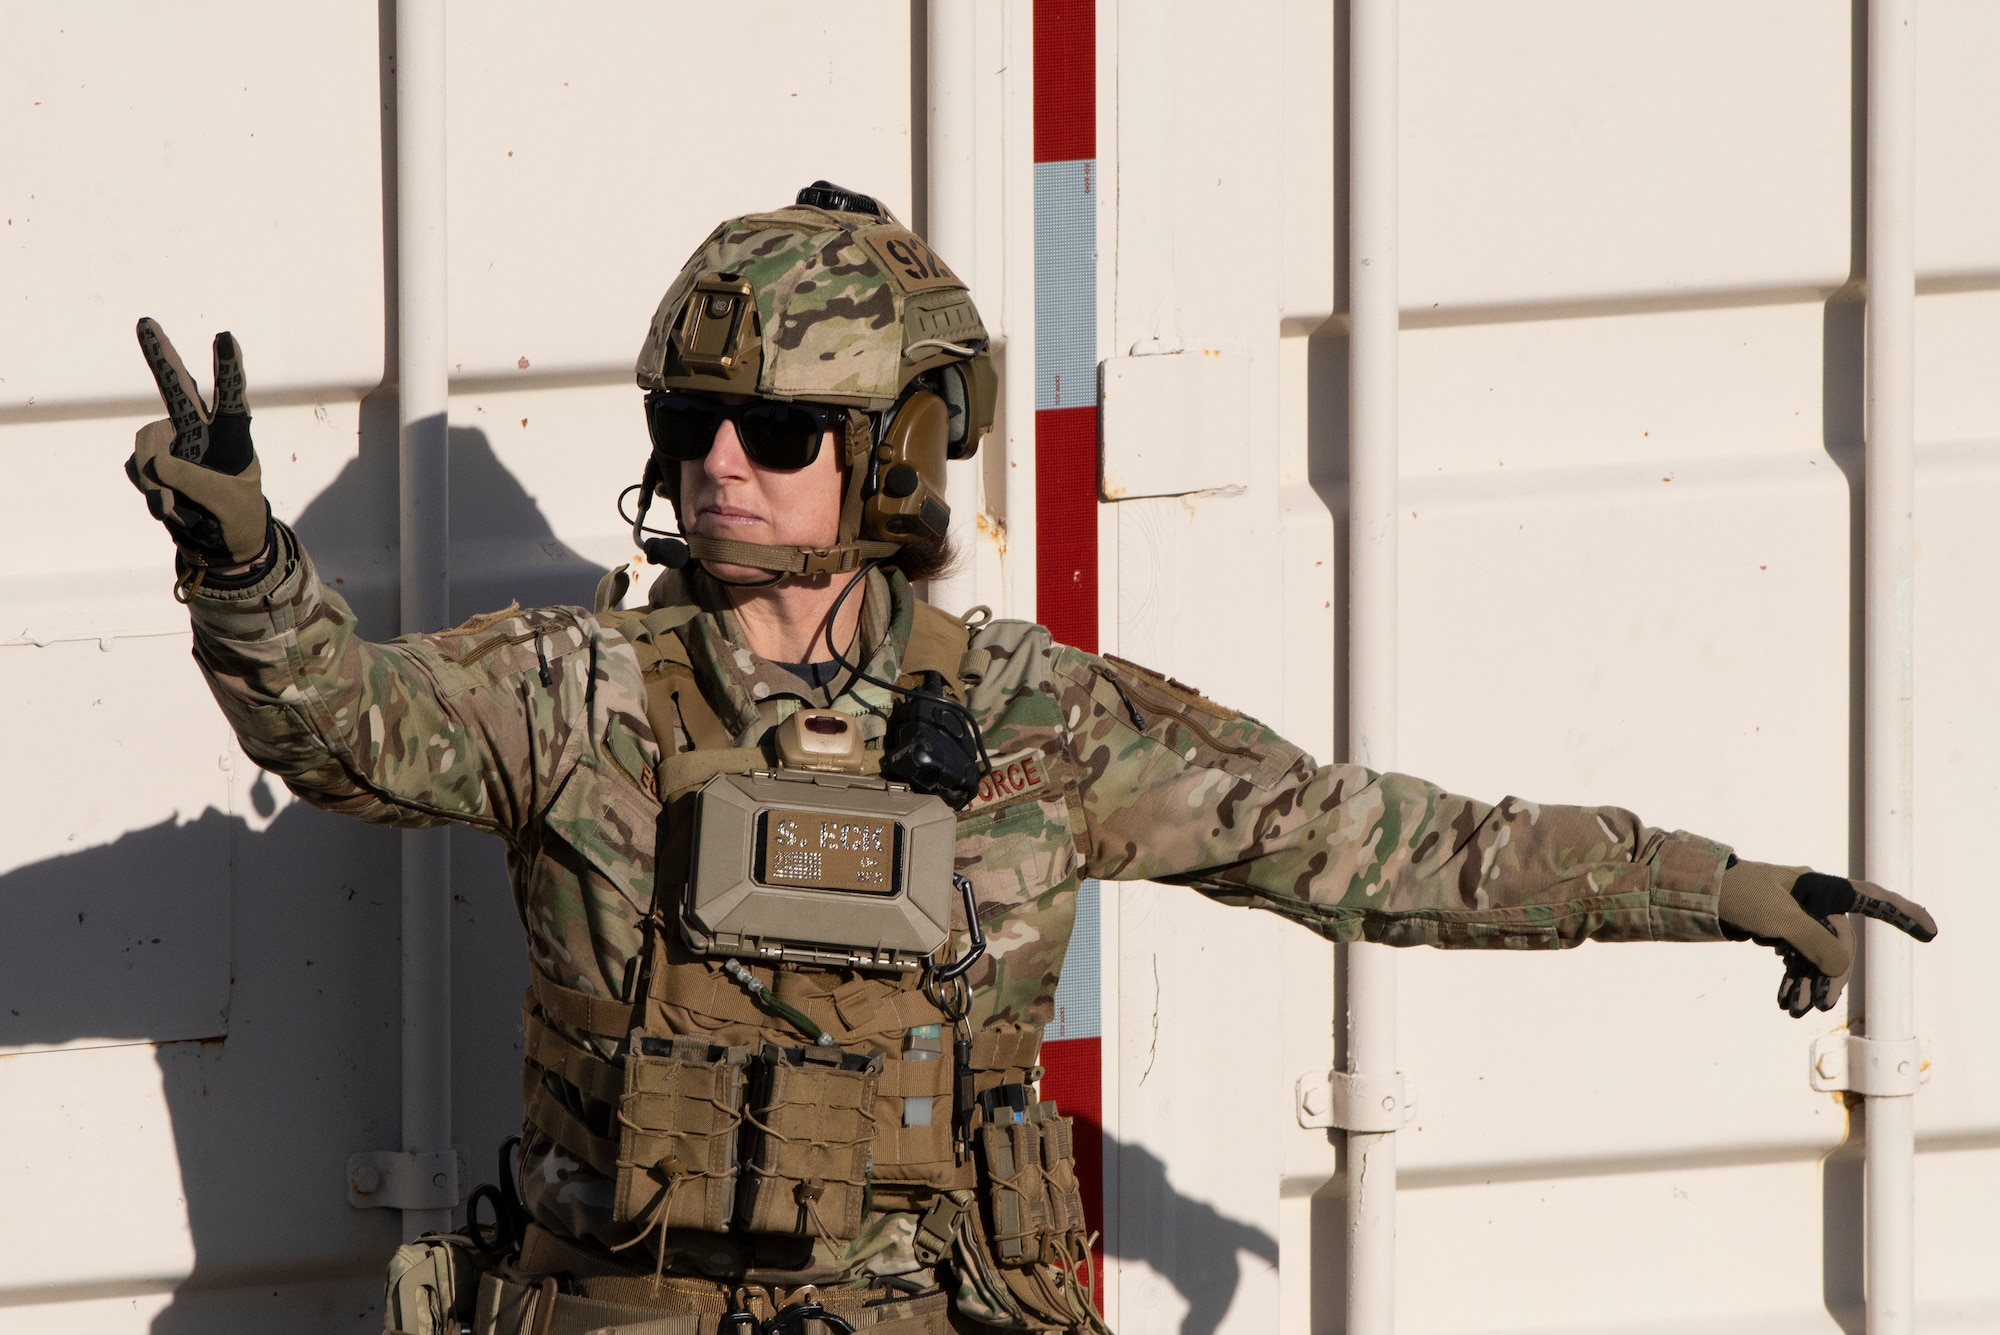 Airman signals to other Airmen.